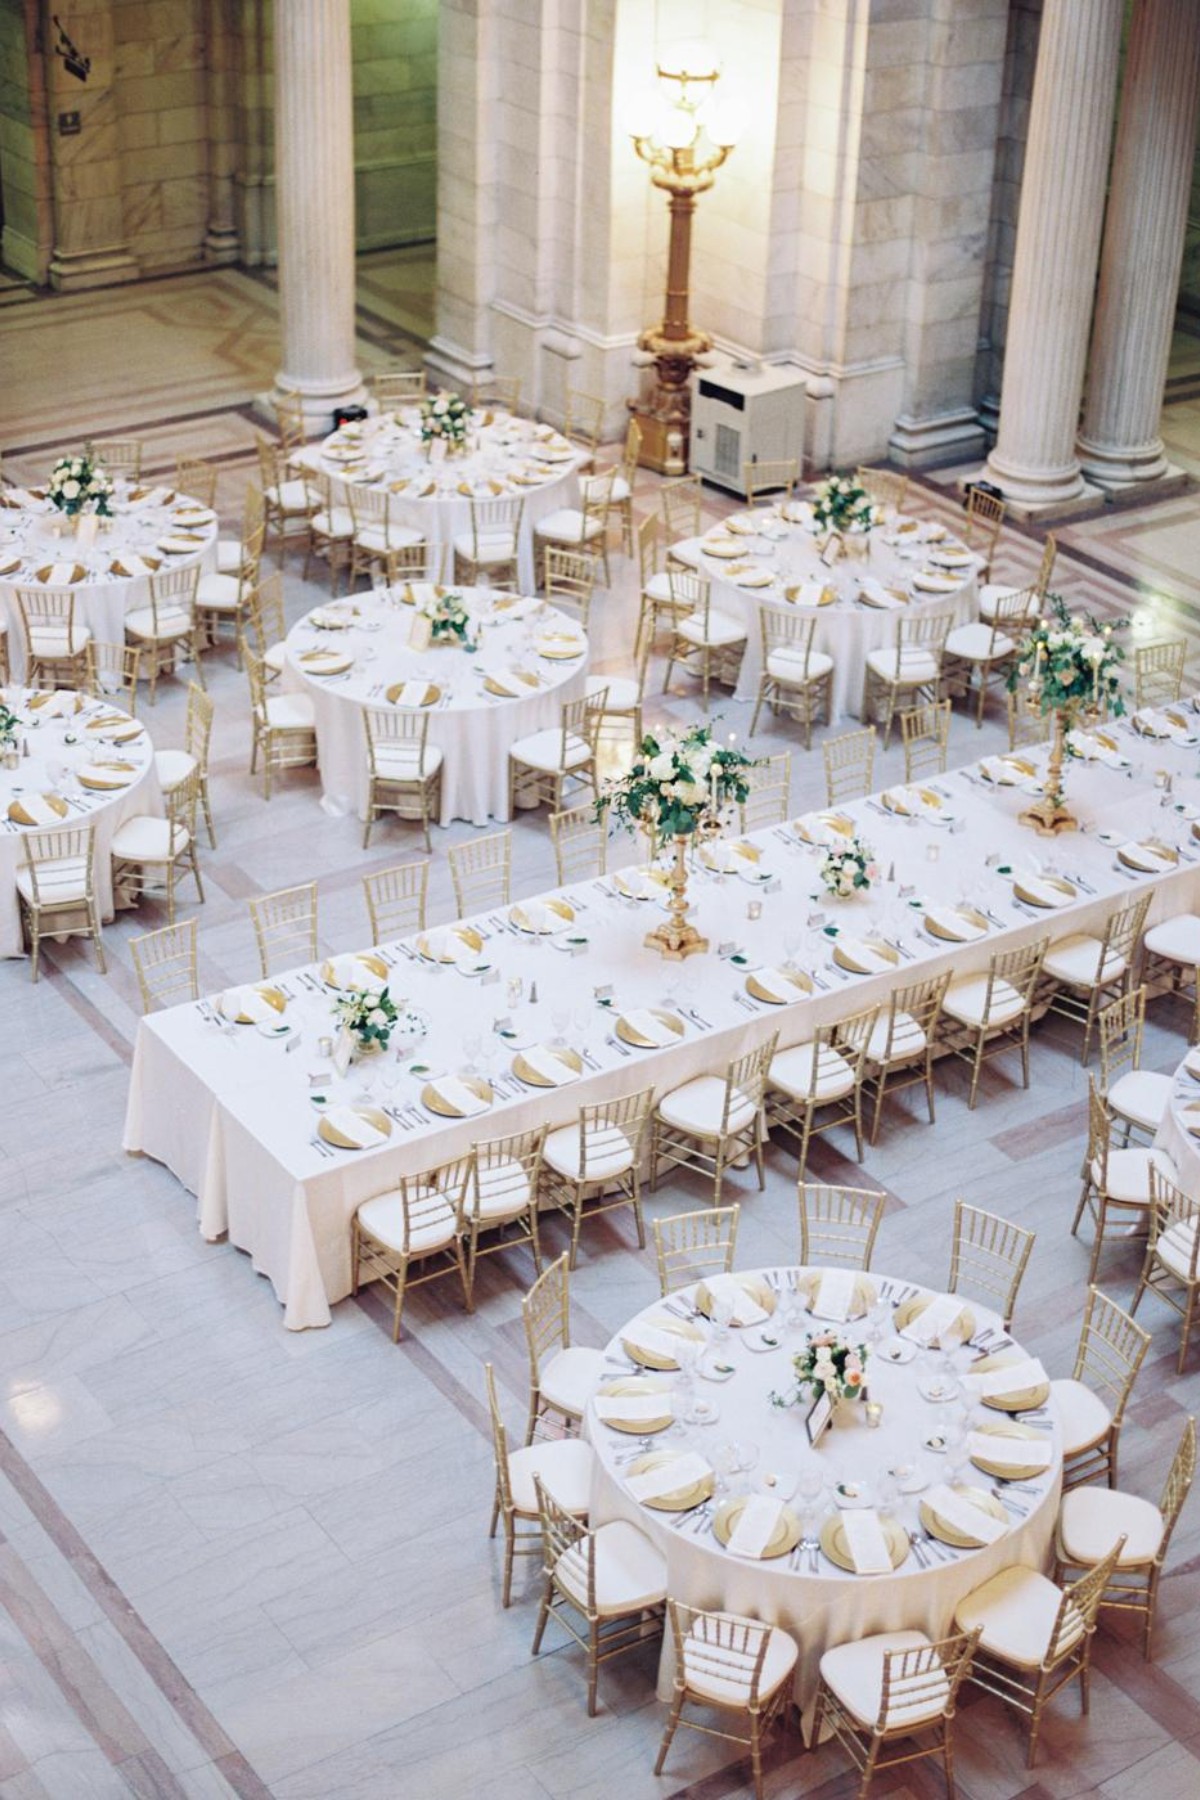 Wedding Reception Floor Plan: How To Set Up To Maximize Space